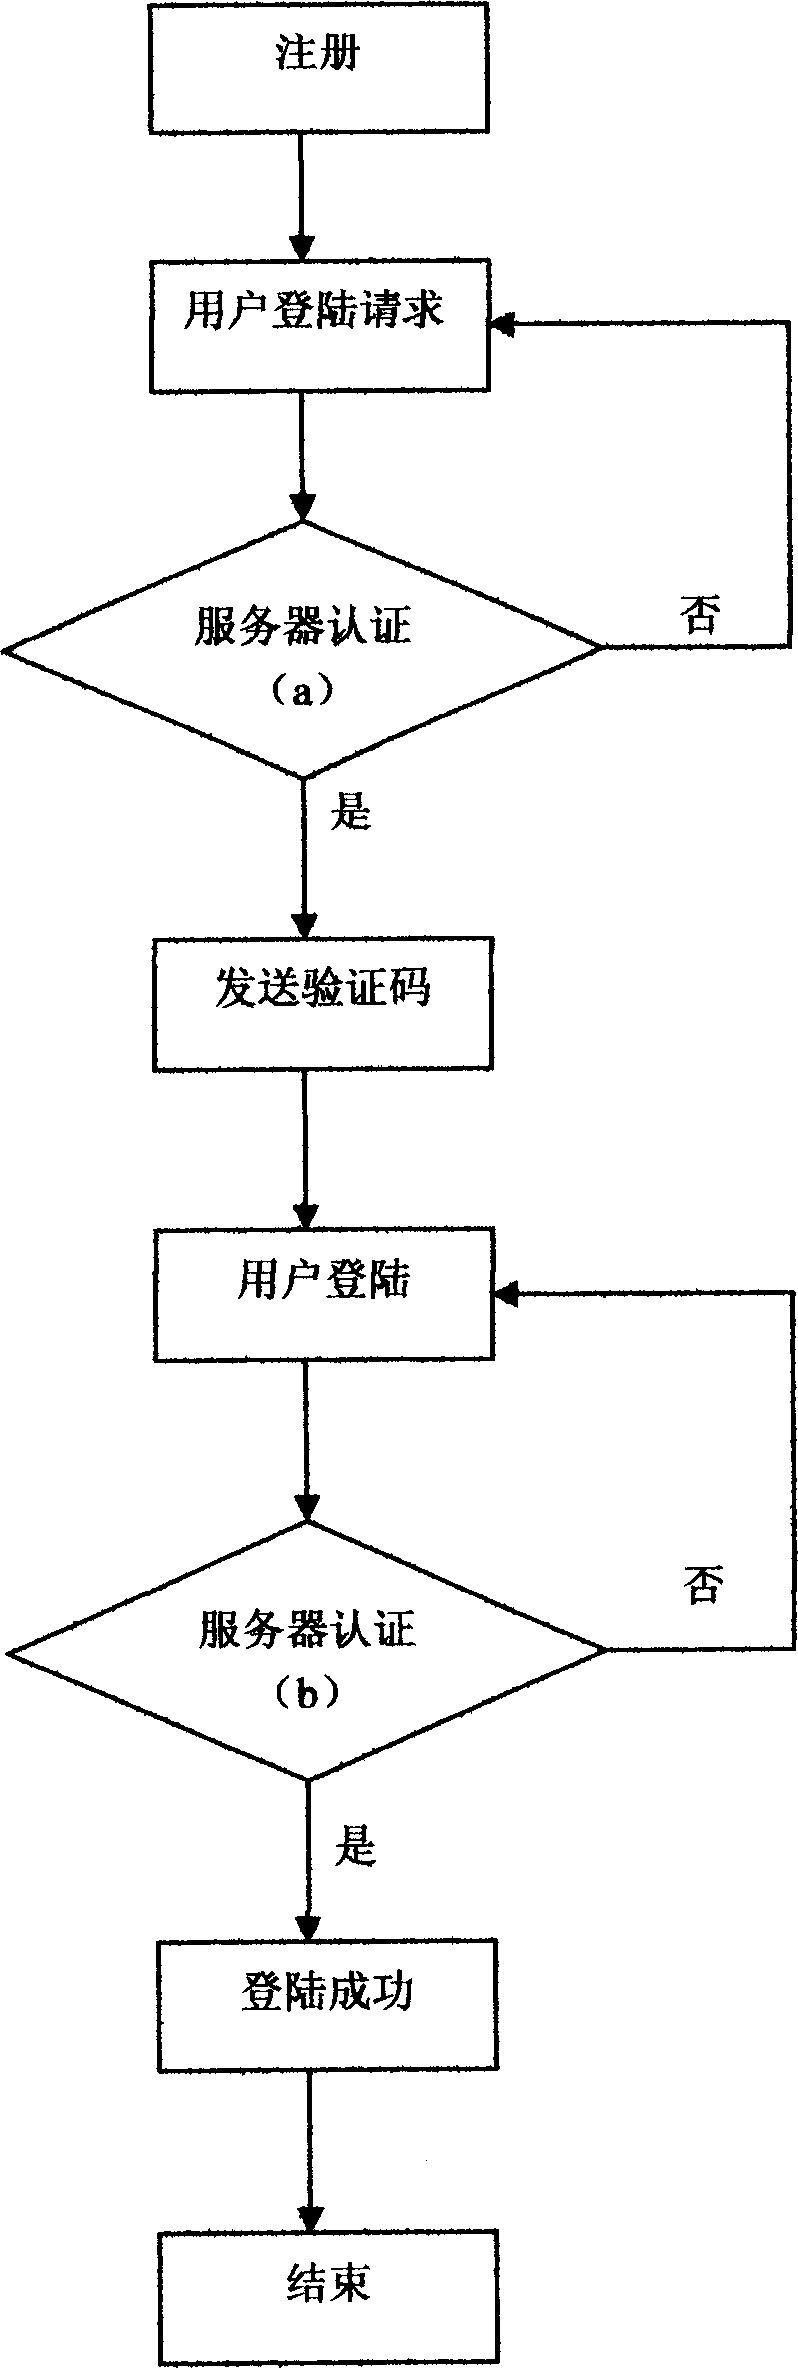 Method for protecting safety of account number cipher